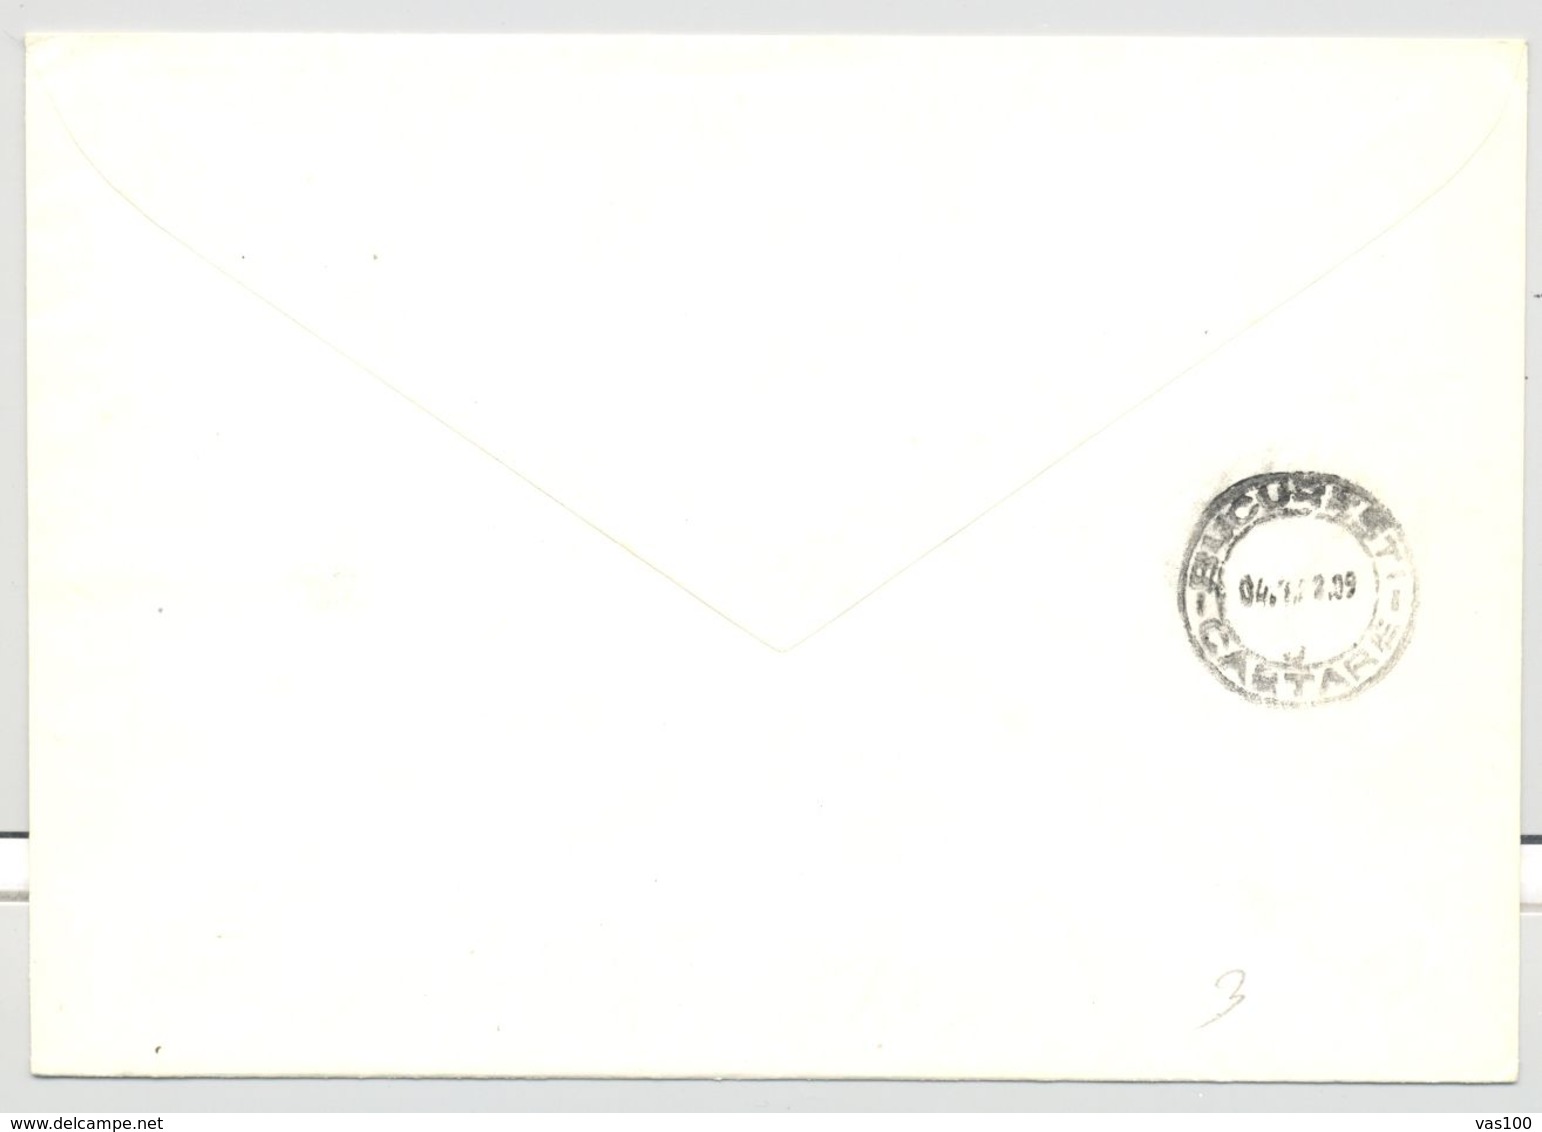 SOCIALIST REPUBLIC NATIONAL DAY, AUGUST 23, SPECIAL POSTMARK AND STAMP ON COVER, 1987, ROMANIA - Brieven En Documenten